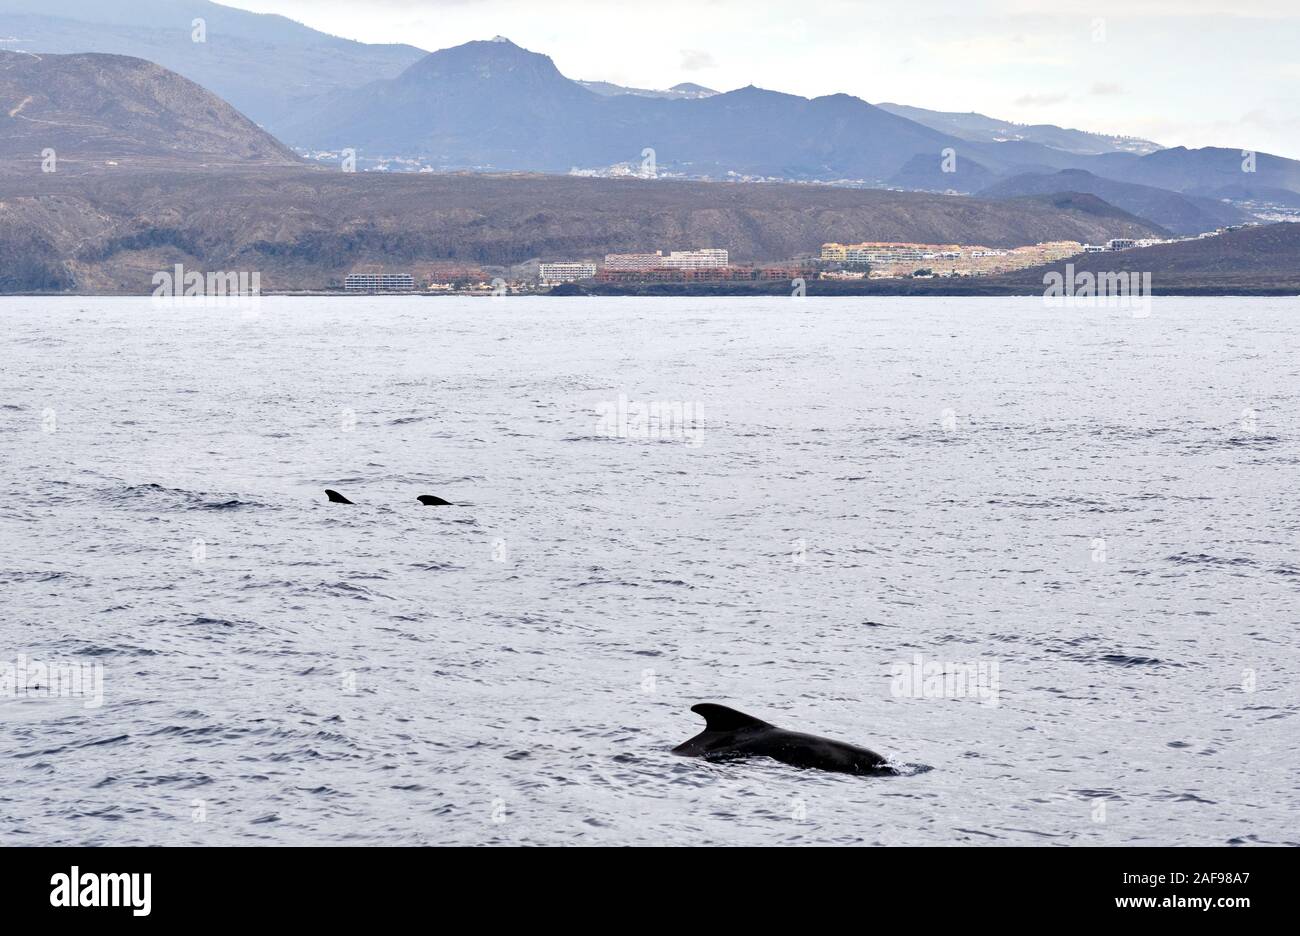 Long-finned pilot whale in waters of Mediterranean Sea. Tenerife Island, Canary, Spain Stock Photo